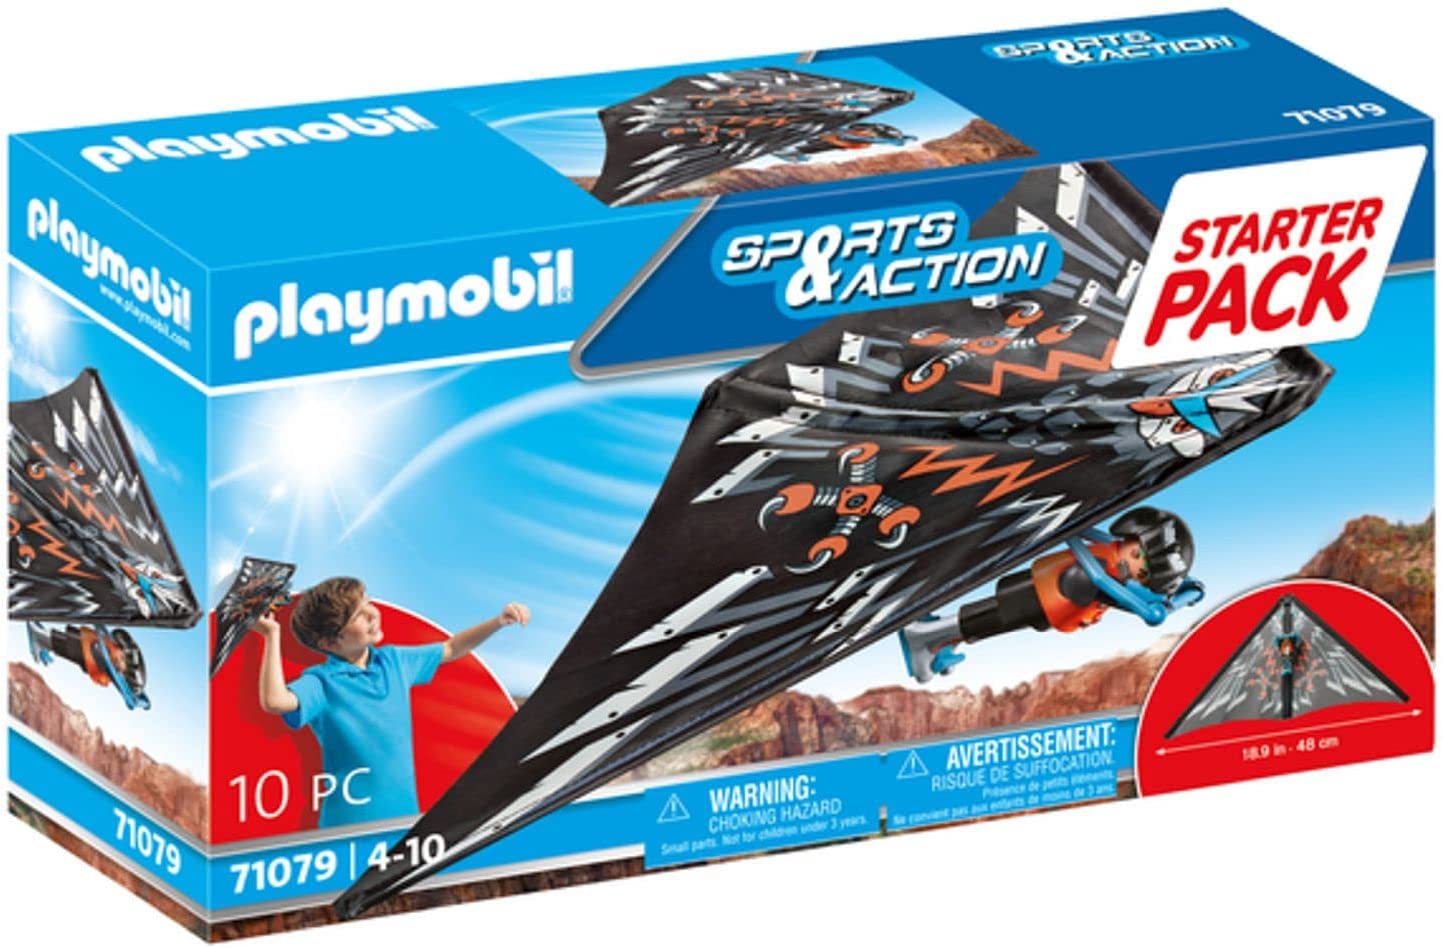 PLAYMOBIL Sports & Action 71079 Starter Pack Dragon Flyer, Stuntman and Toy Dragon, First Toy for Children from 4 Years